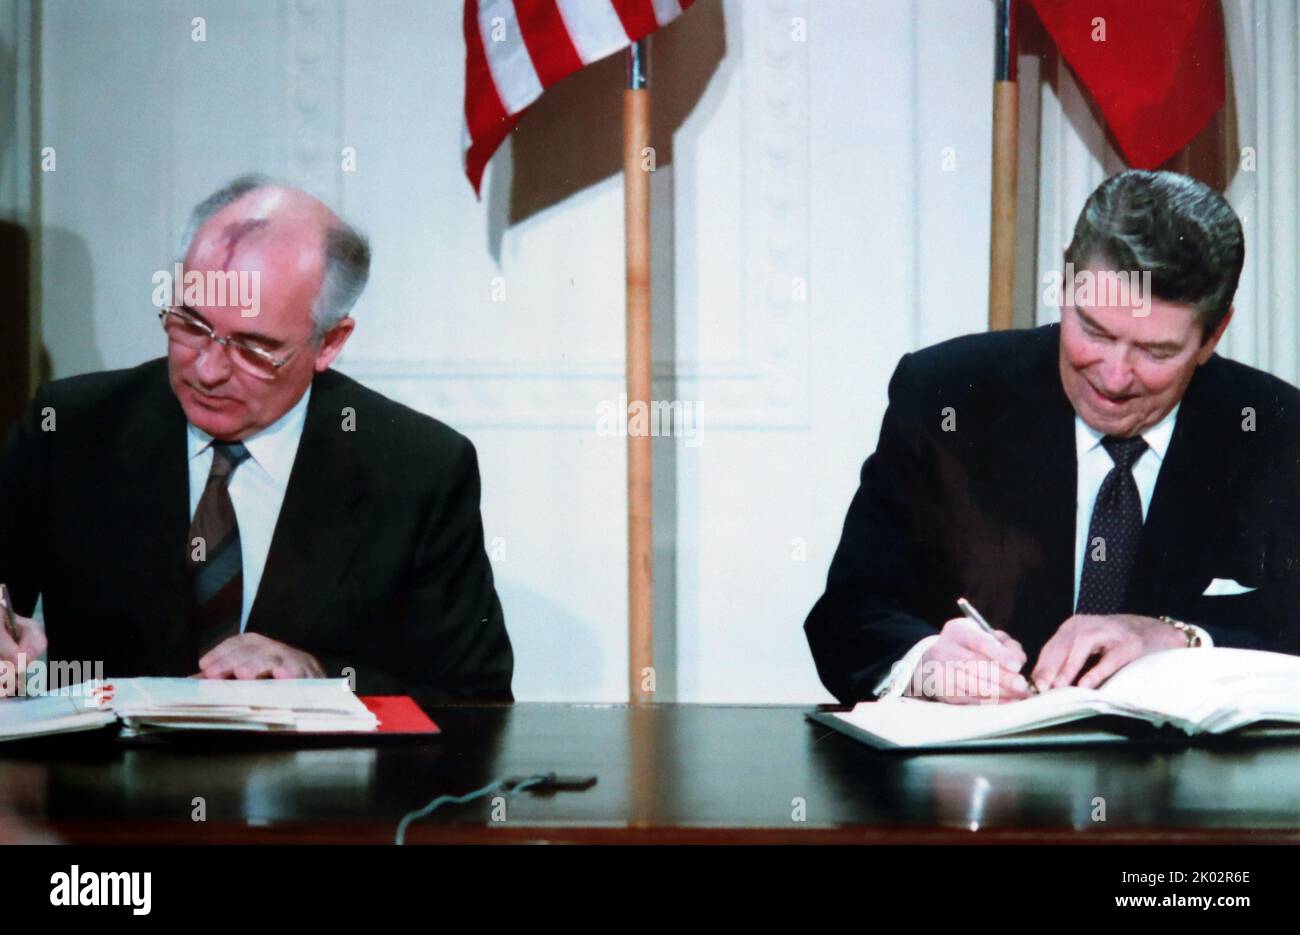 Mikhail Gorbachev and Ronald Reagan sign the INF Treaty. The Intermediate-Range Nuclear Forces Treaty (INF Treaty) Between the United States of America and the Soviet Union, was an arms control treaty, signed on 8 December 1987. Stock Photo